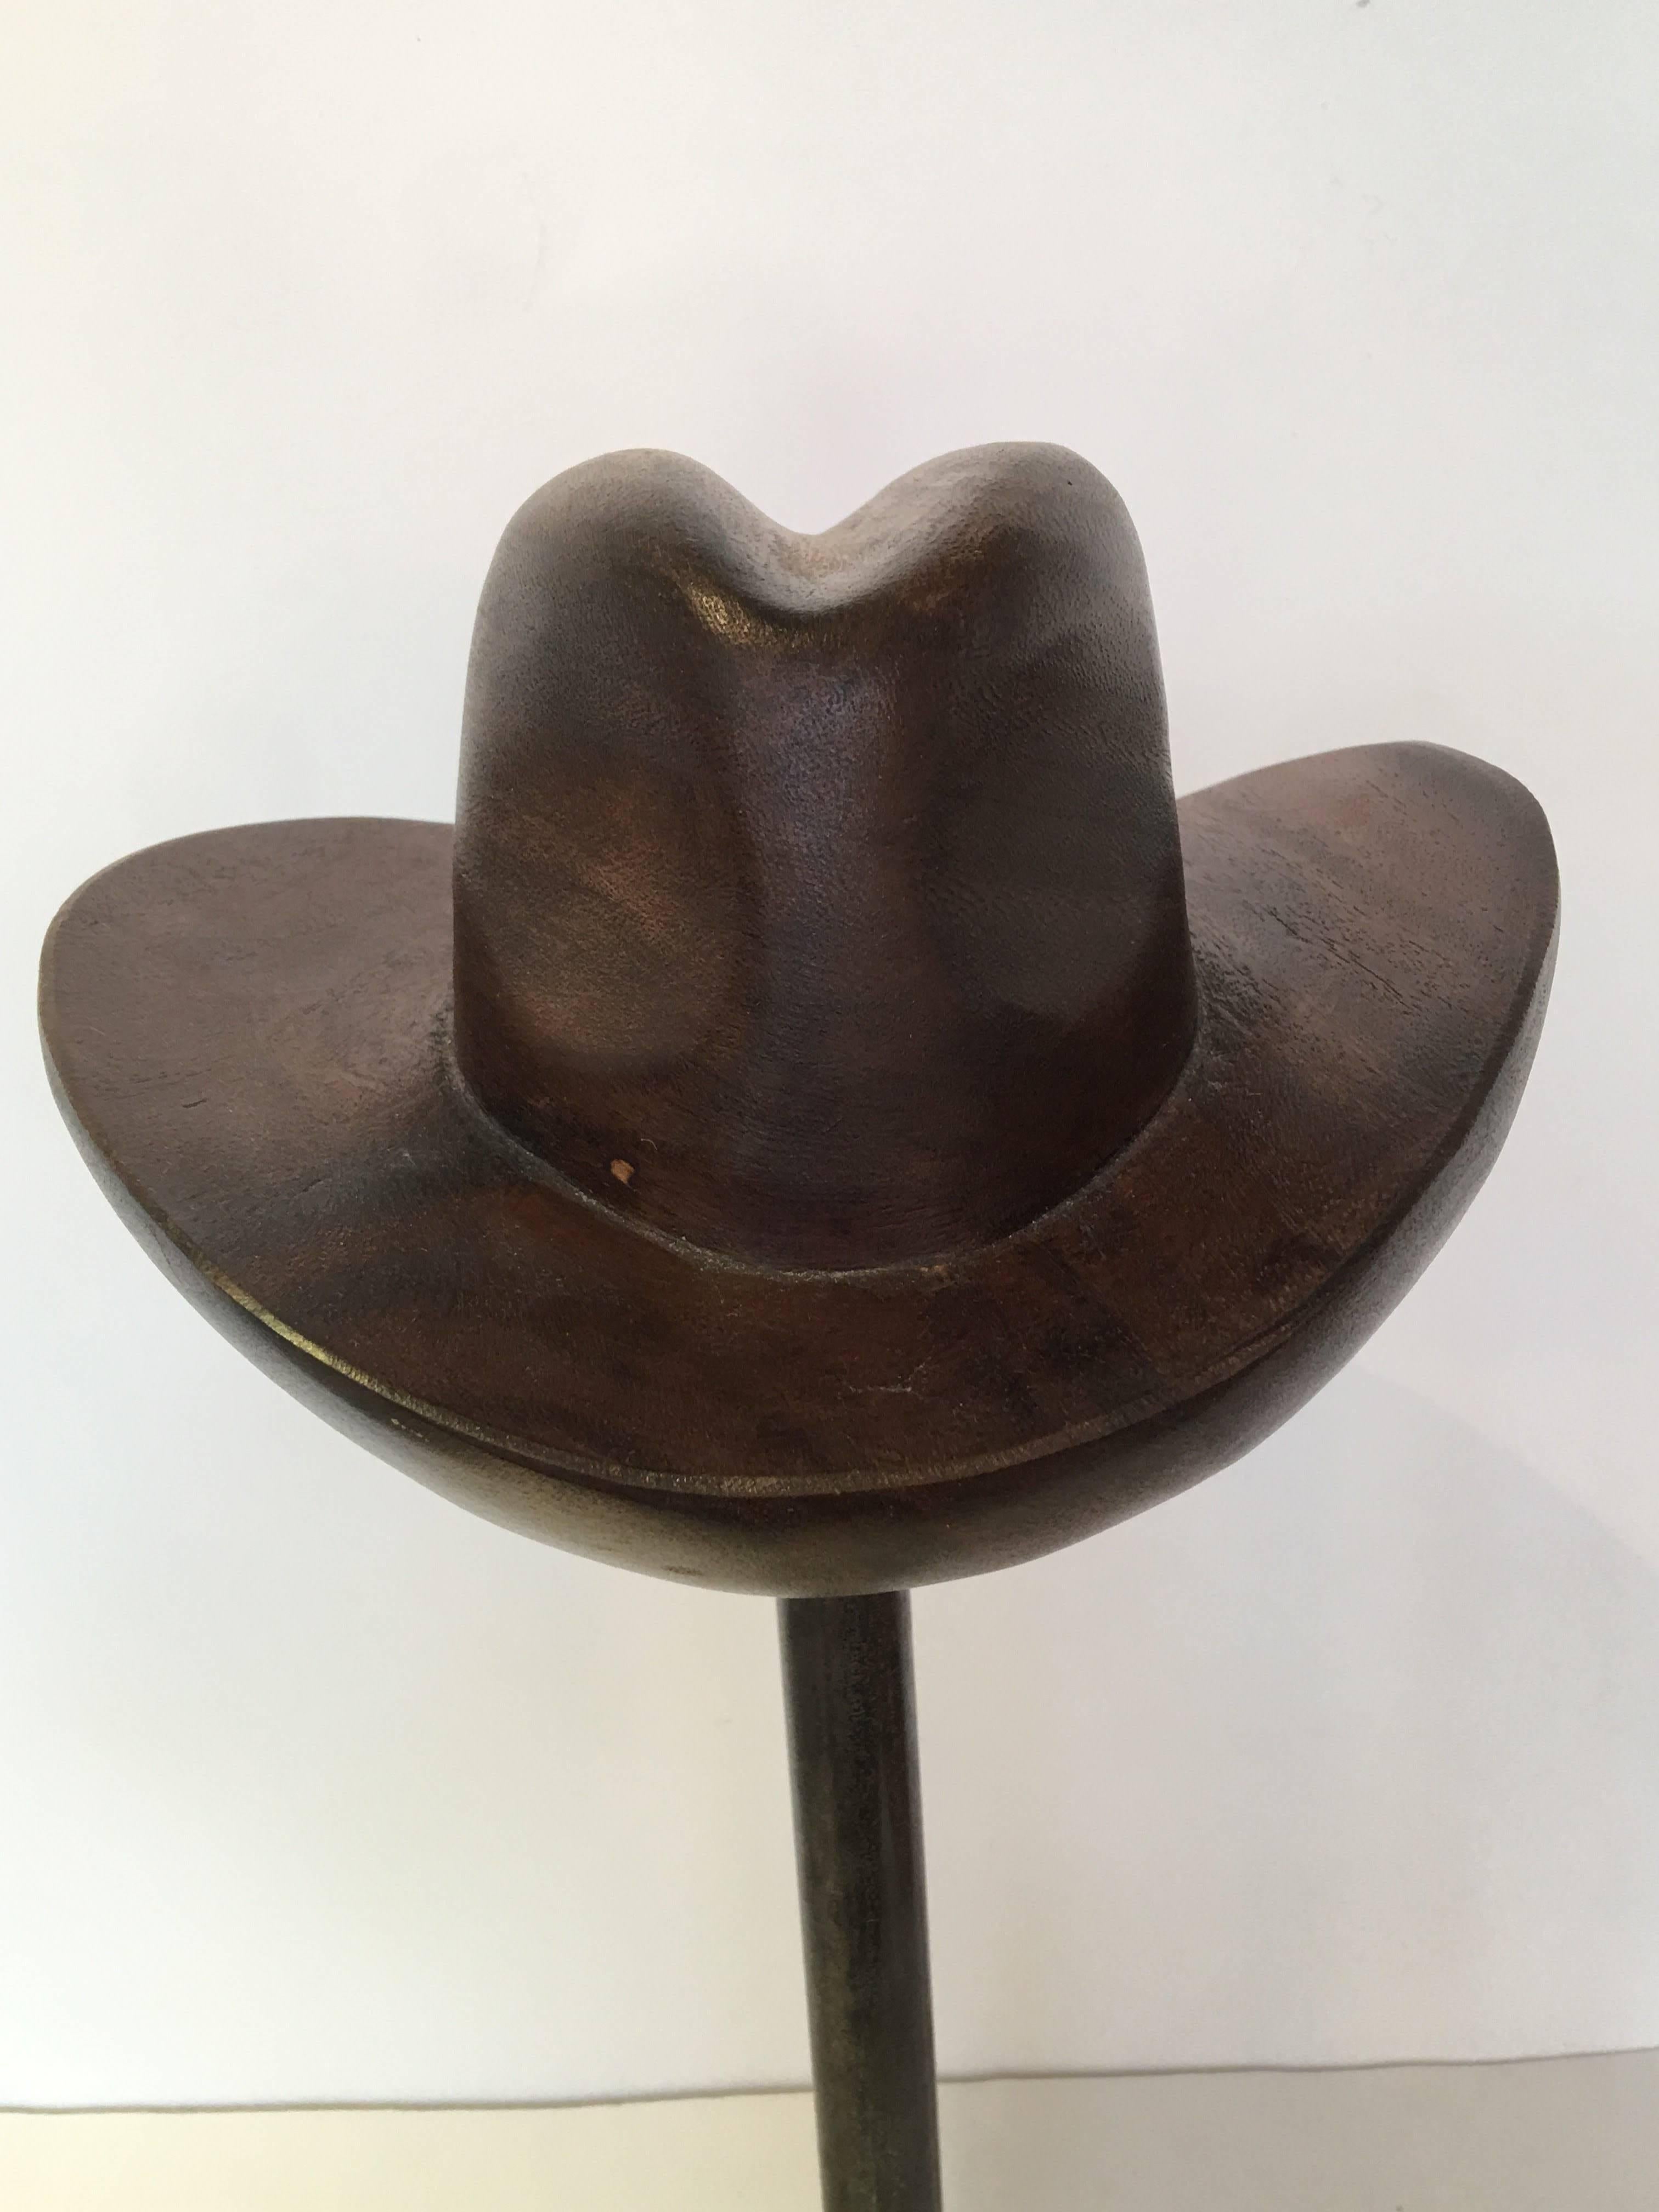 French wood hat mold on metal stand.
Cowboy style hat,
circa 1940s #433.